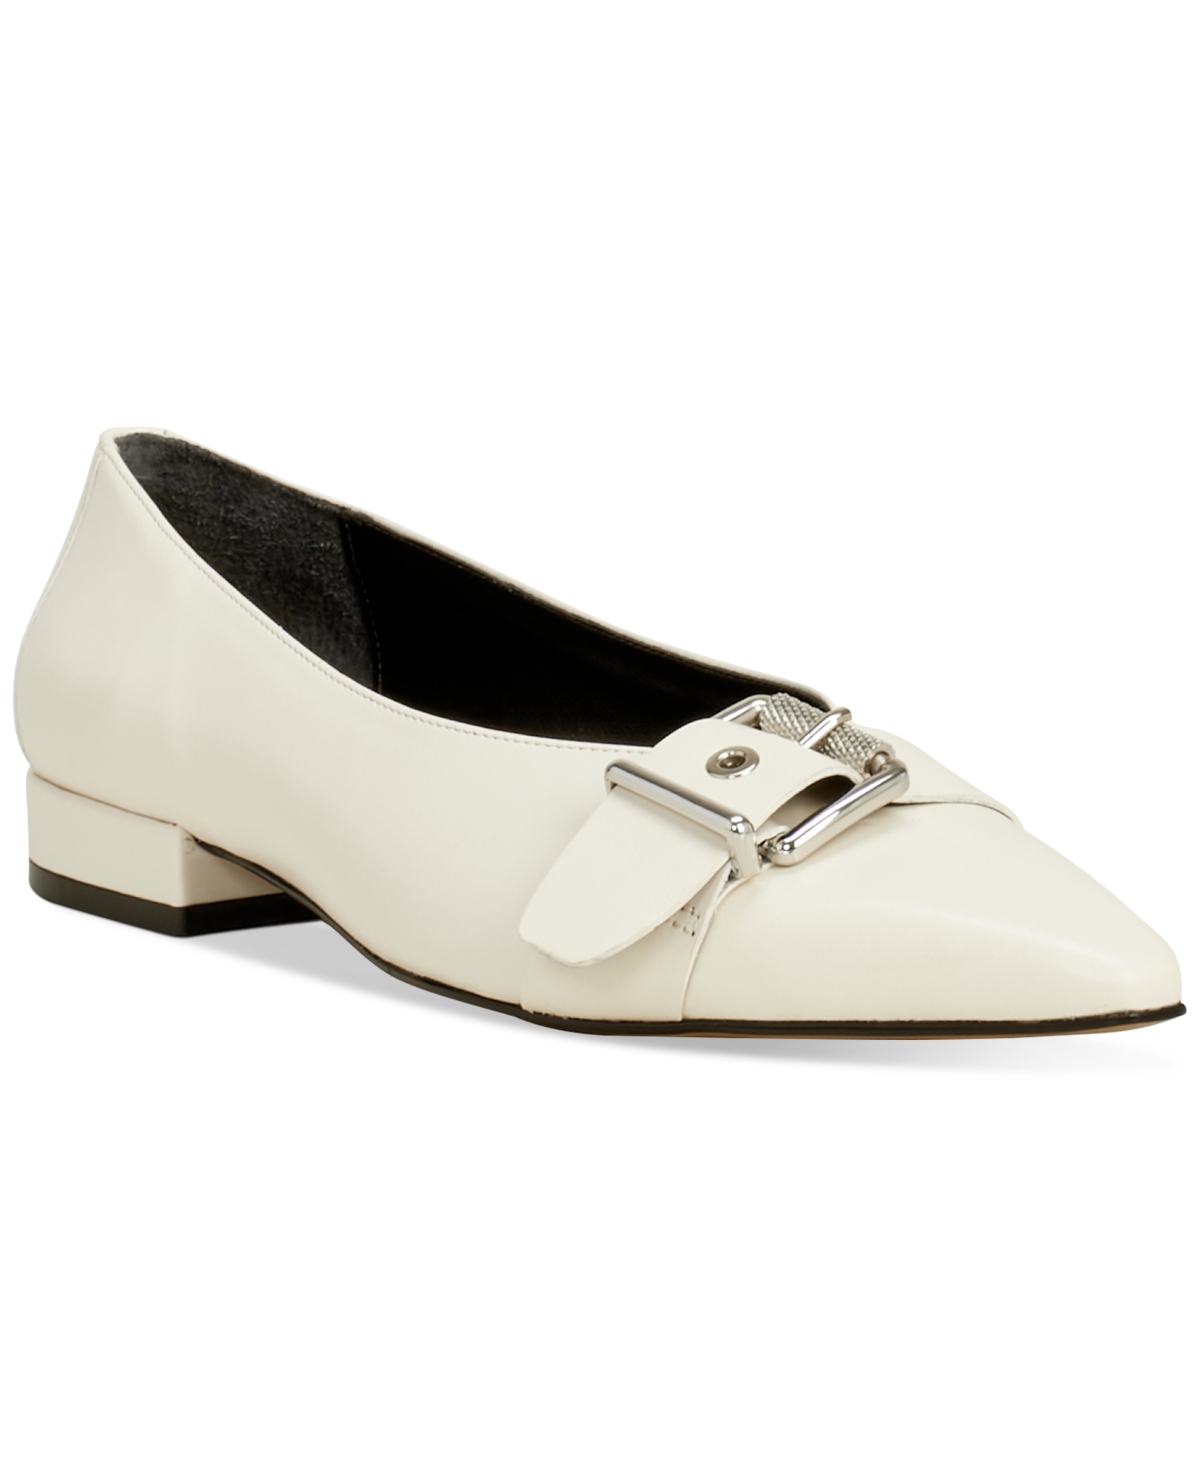 Women's Megdele Buckled Pointed-Toe Flats - Creamy White Leather